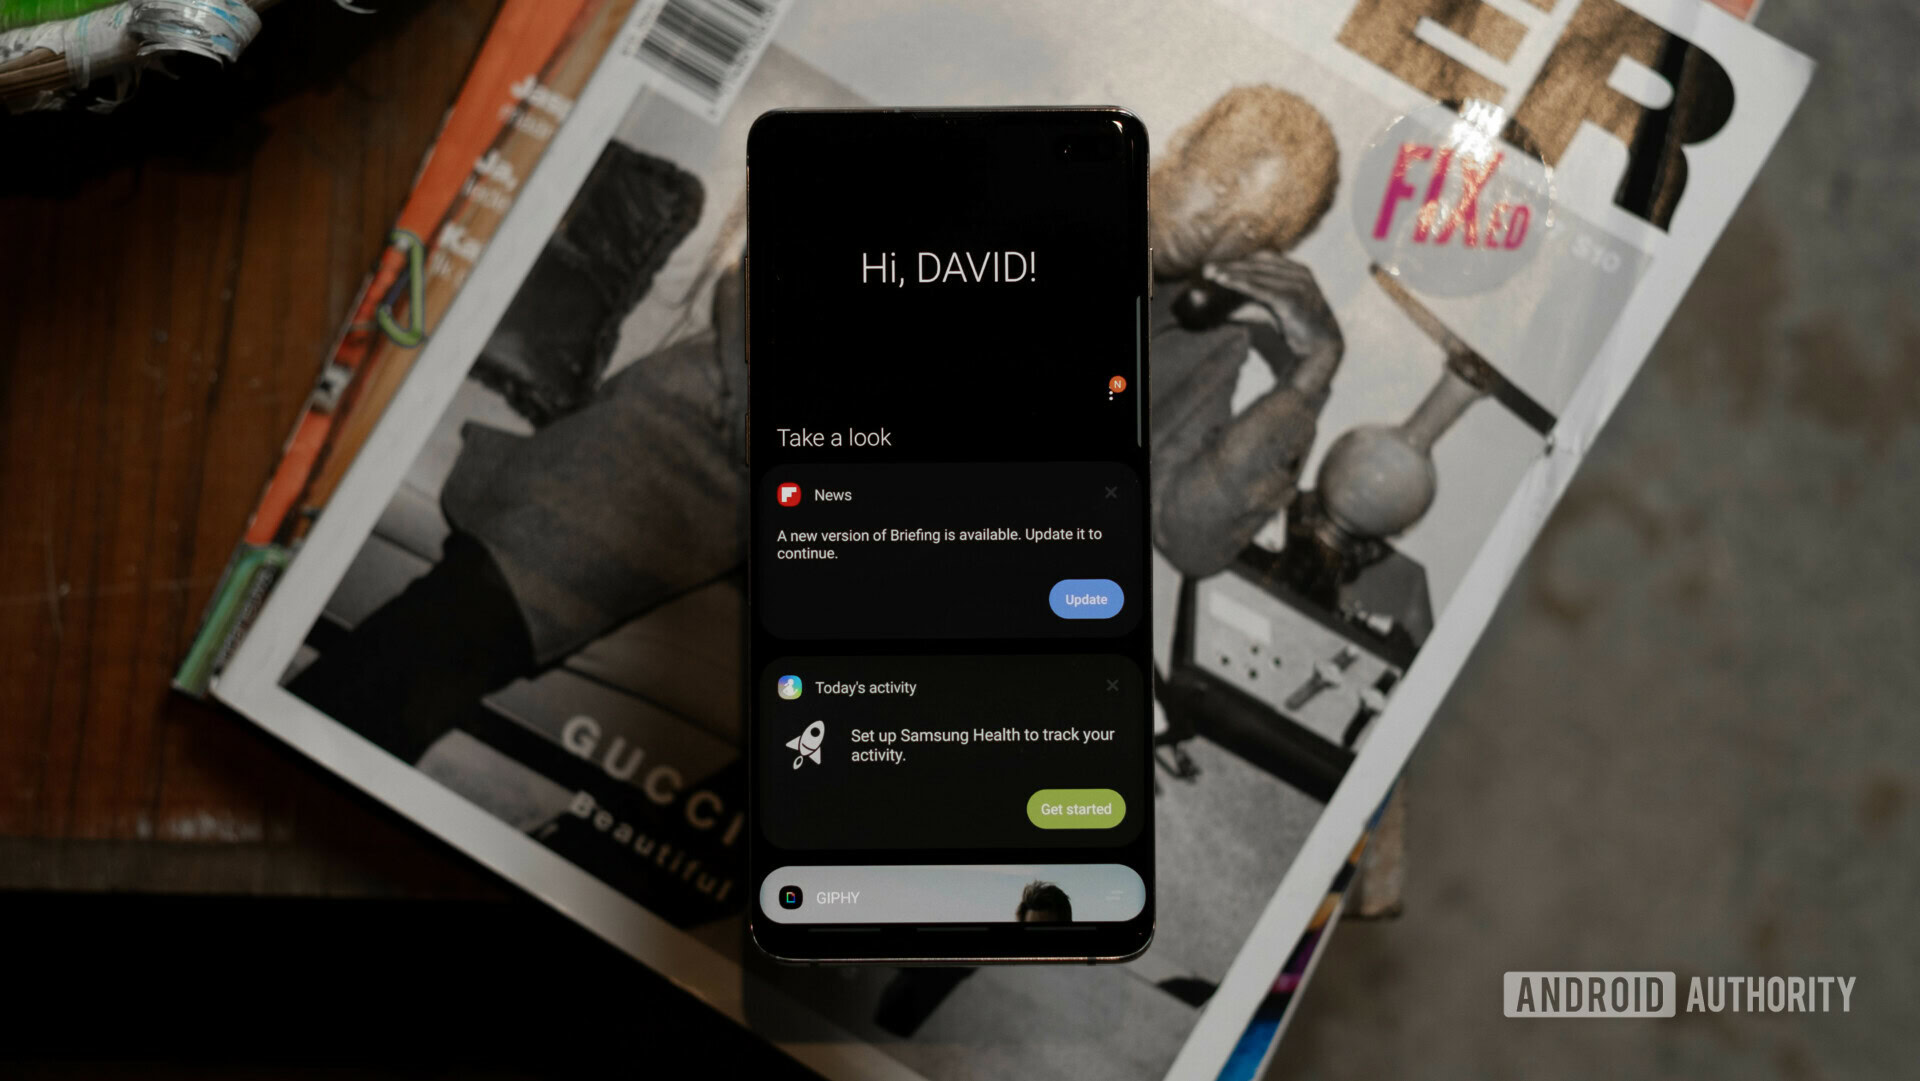 How to disable Bixby on Samsung Galaxy phones - Android Authority